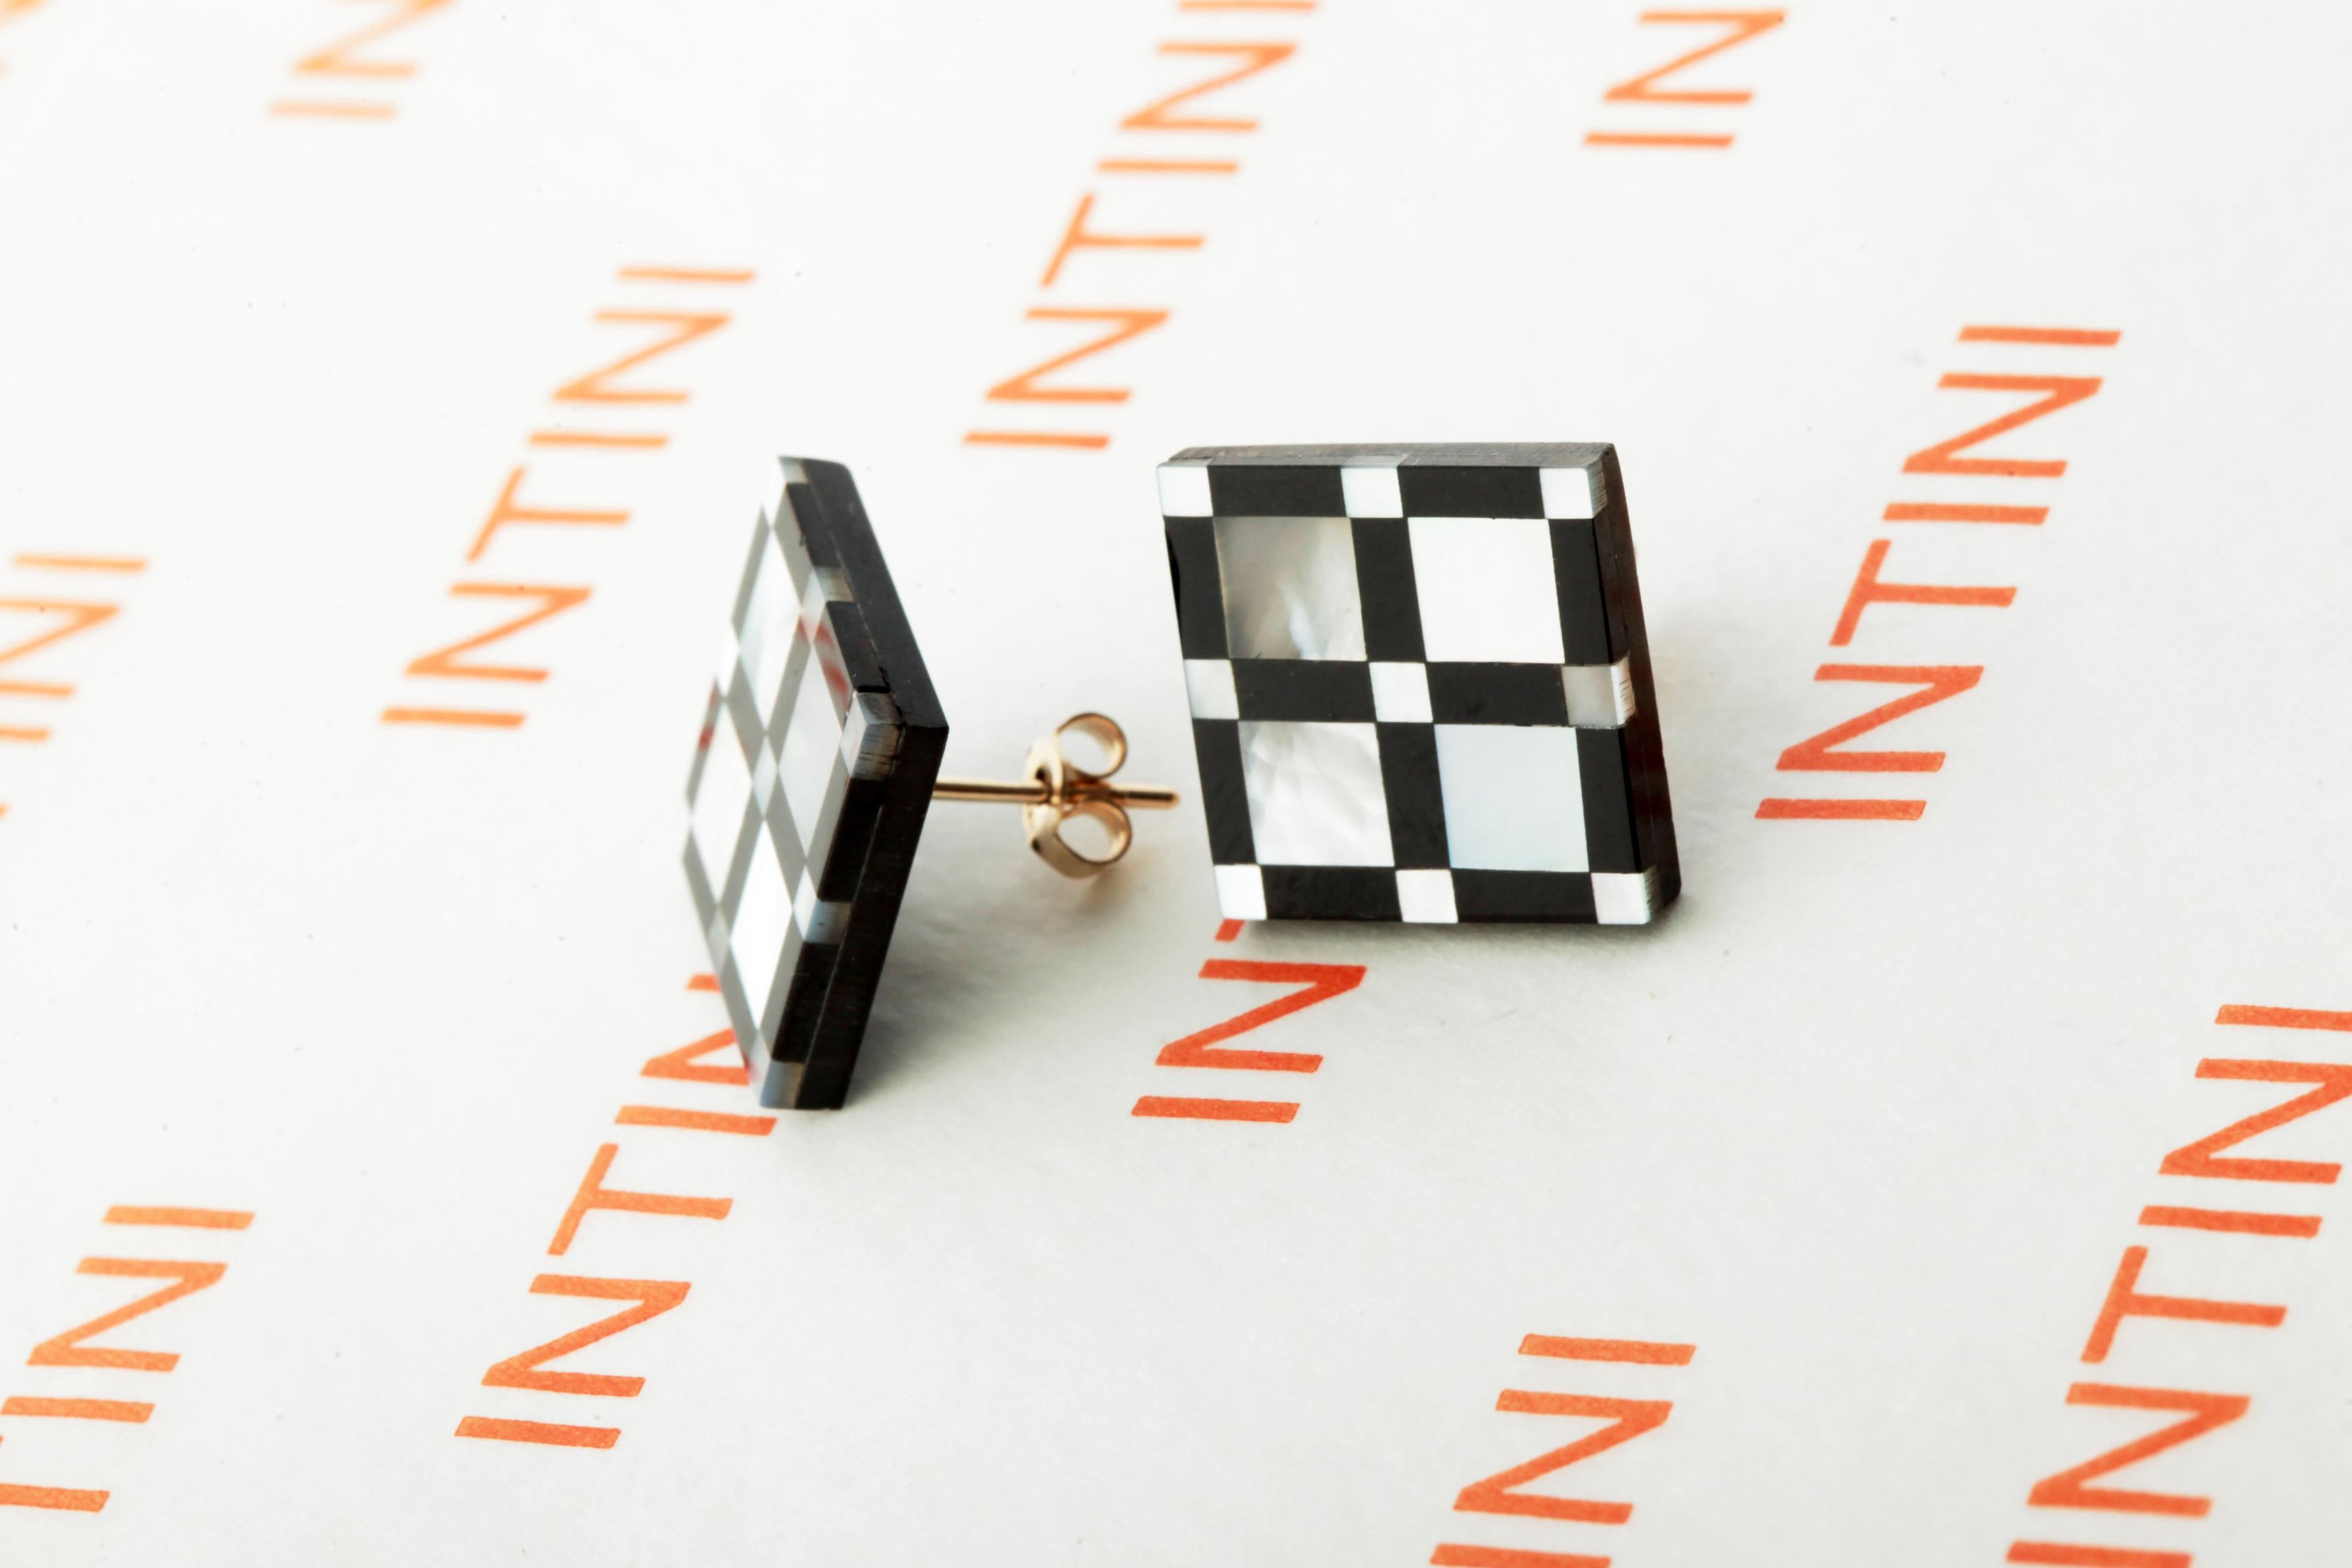 Astonishing and gorgeous agate and mother of pearl stud earrings. Carved colored squares which evokes the italian handmade jewelry work. Geometric and square earrings.

A protection stone, Mother of Pearl brings the gentle healing power of the sea.